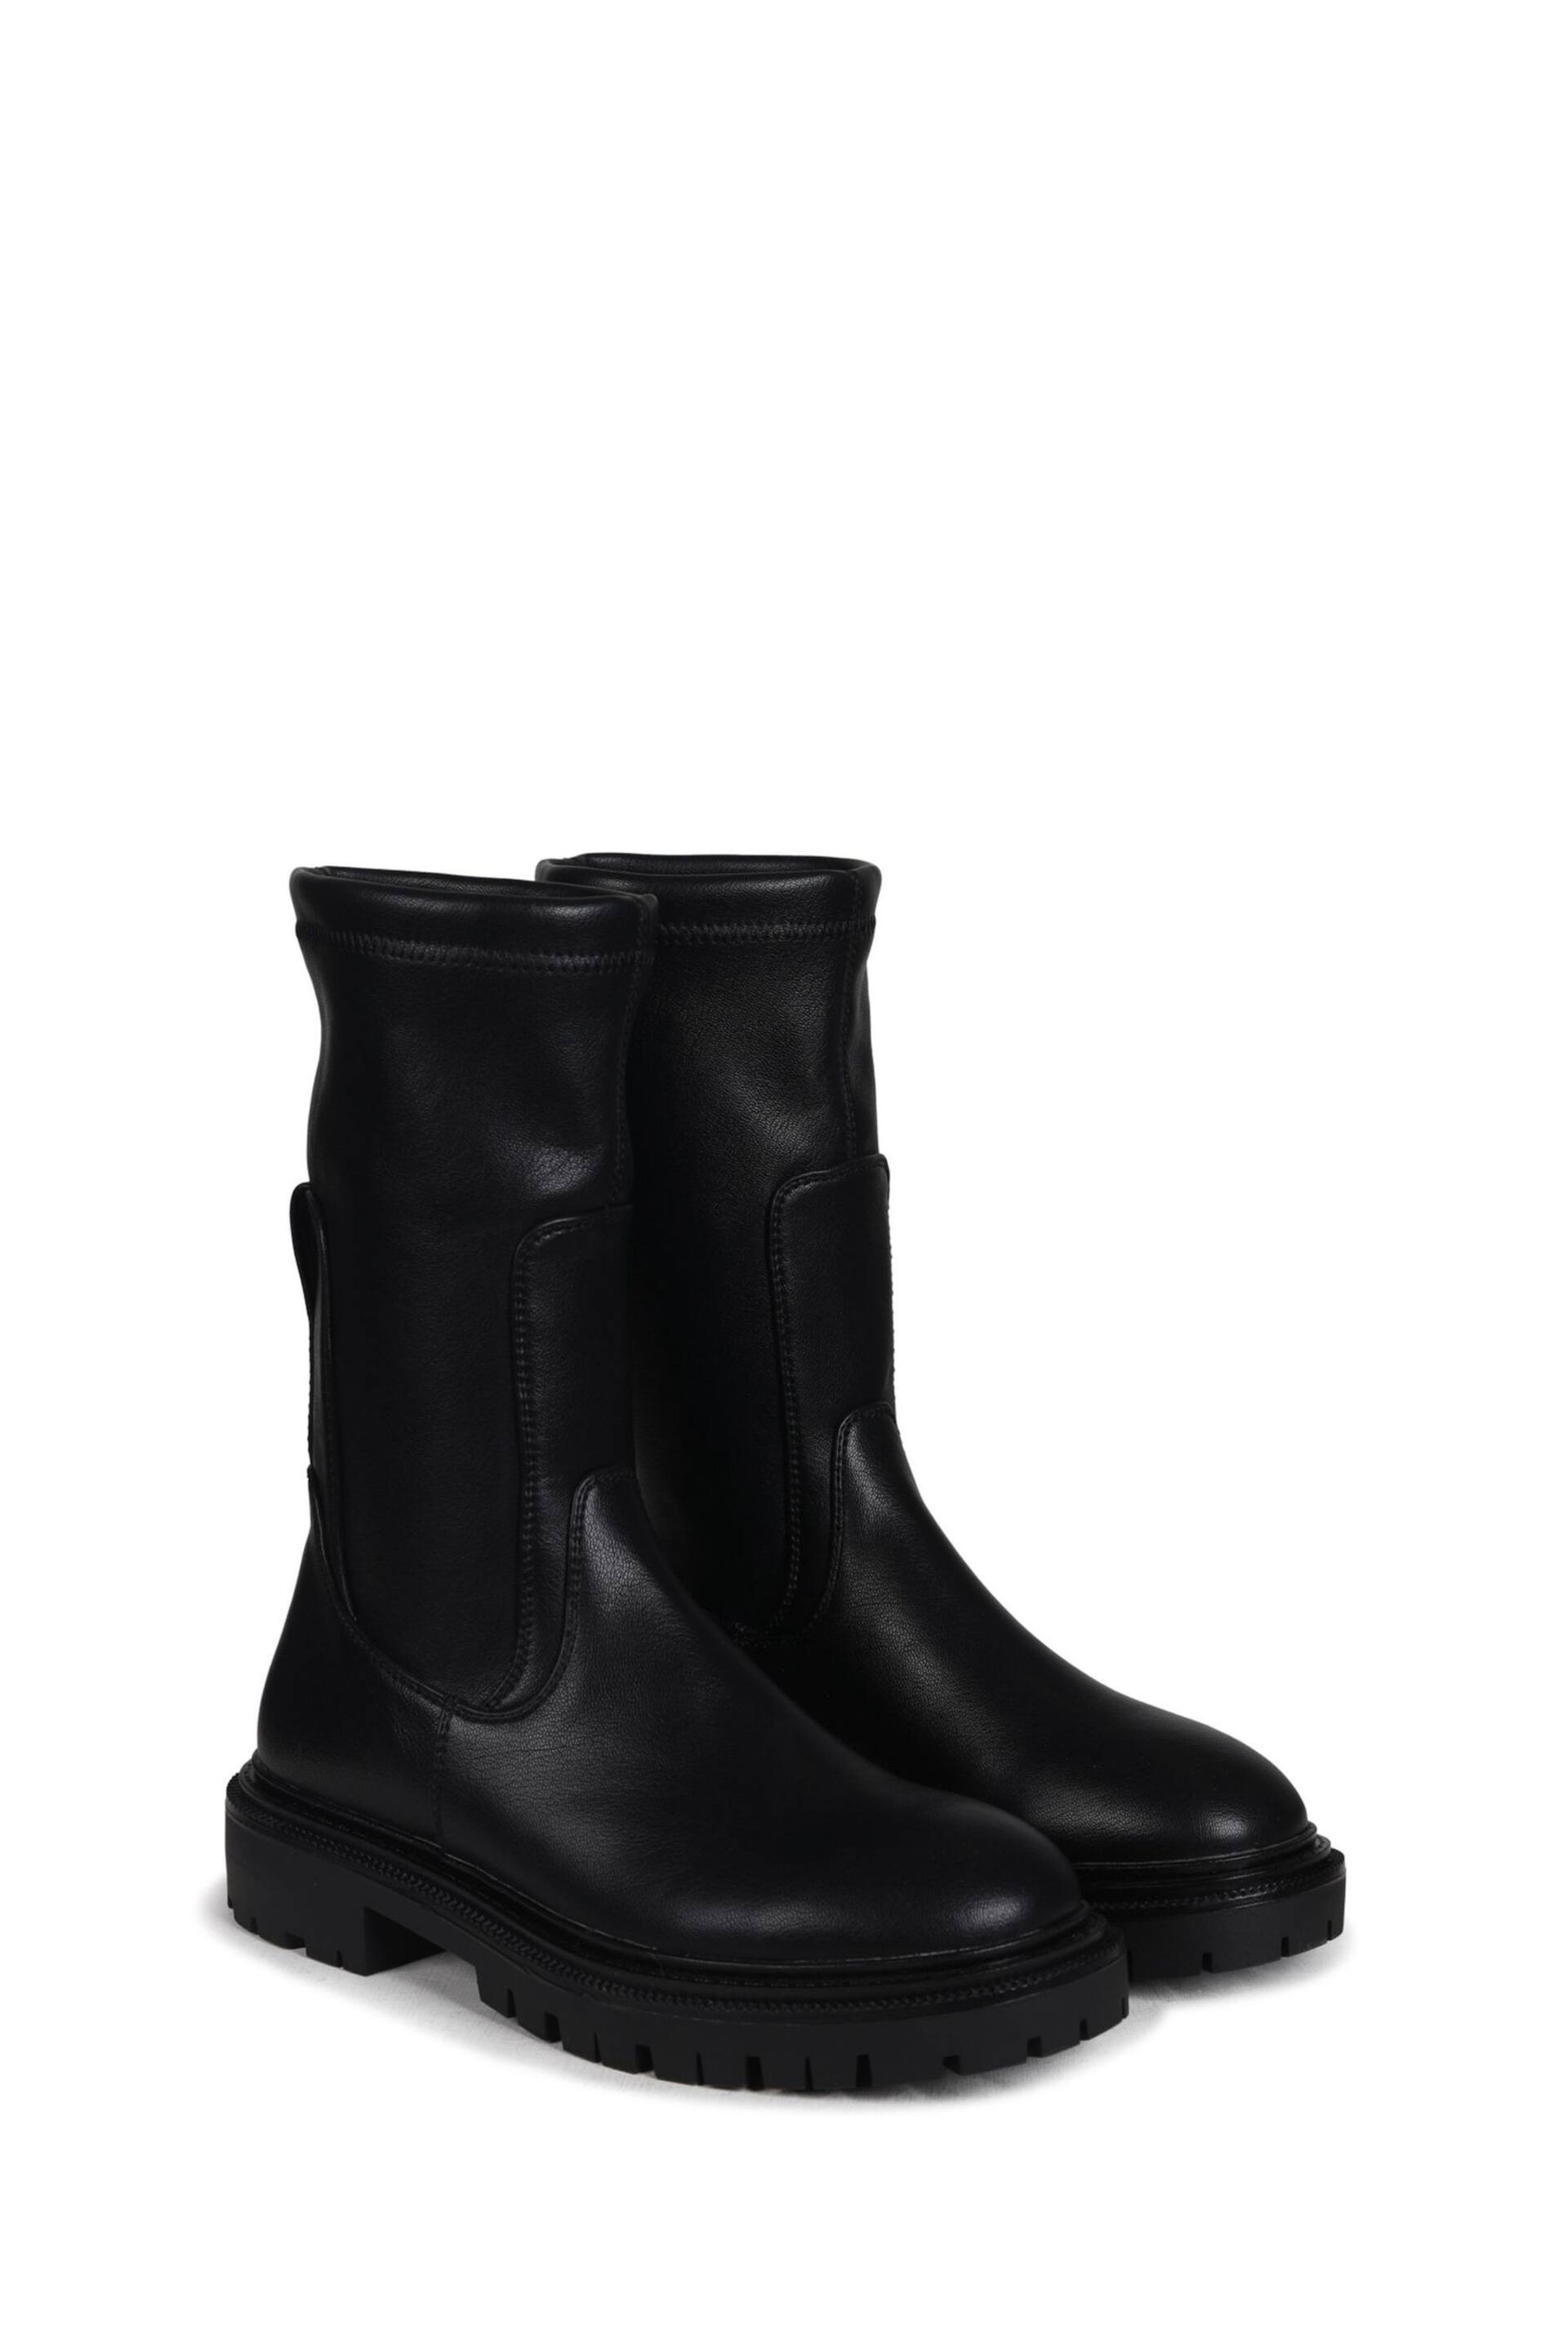 Linzi Black Peggy Pull On Mid Chelsea Boots - Image 3 of 4